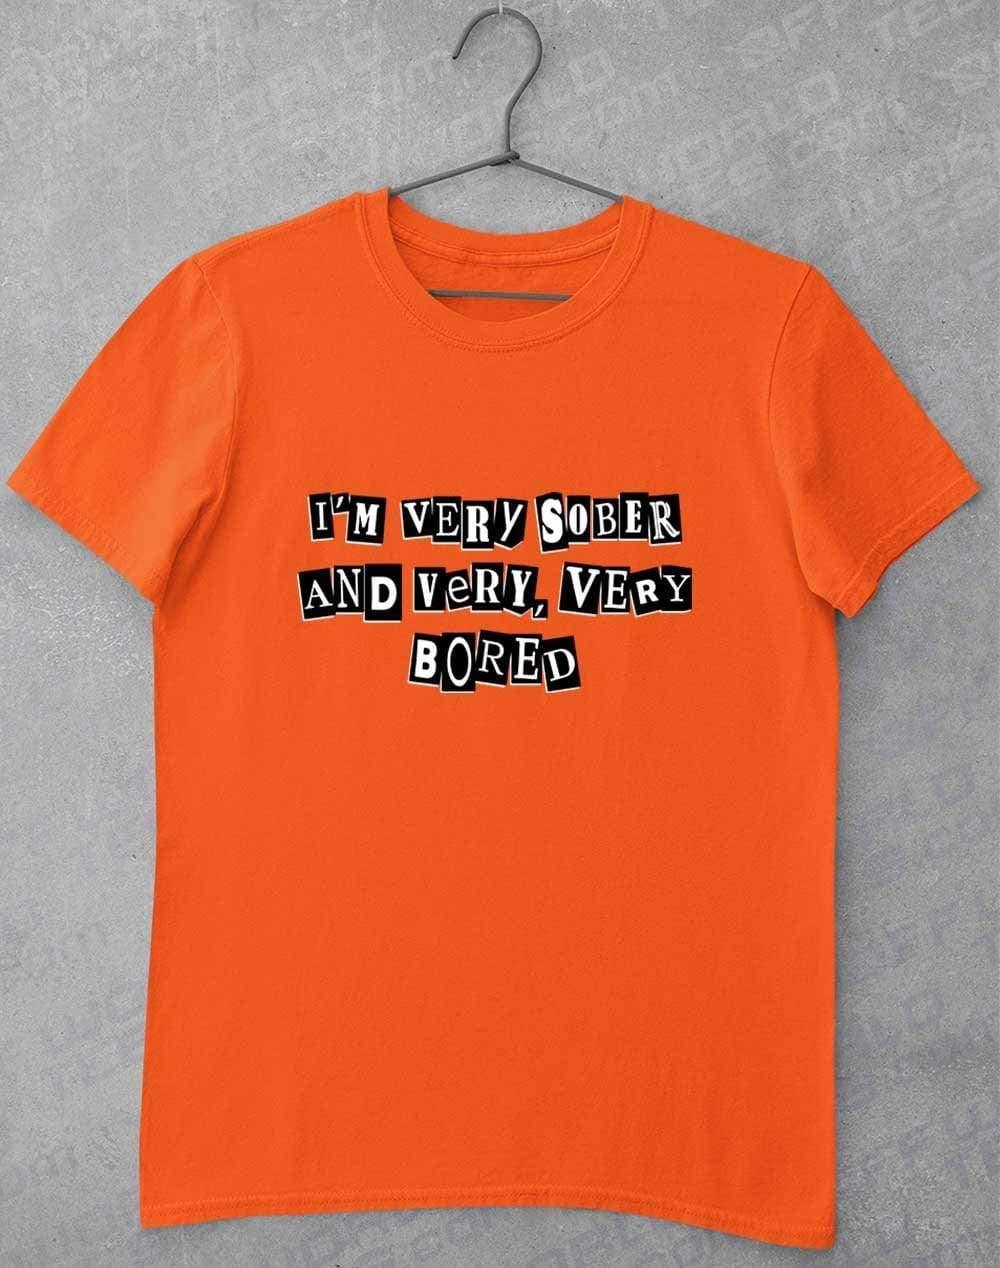 I'm Very Sober and Very Very Bored T-Shirt S / Orange  - Off World Tees